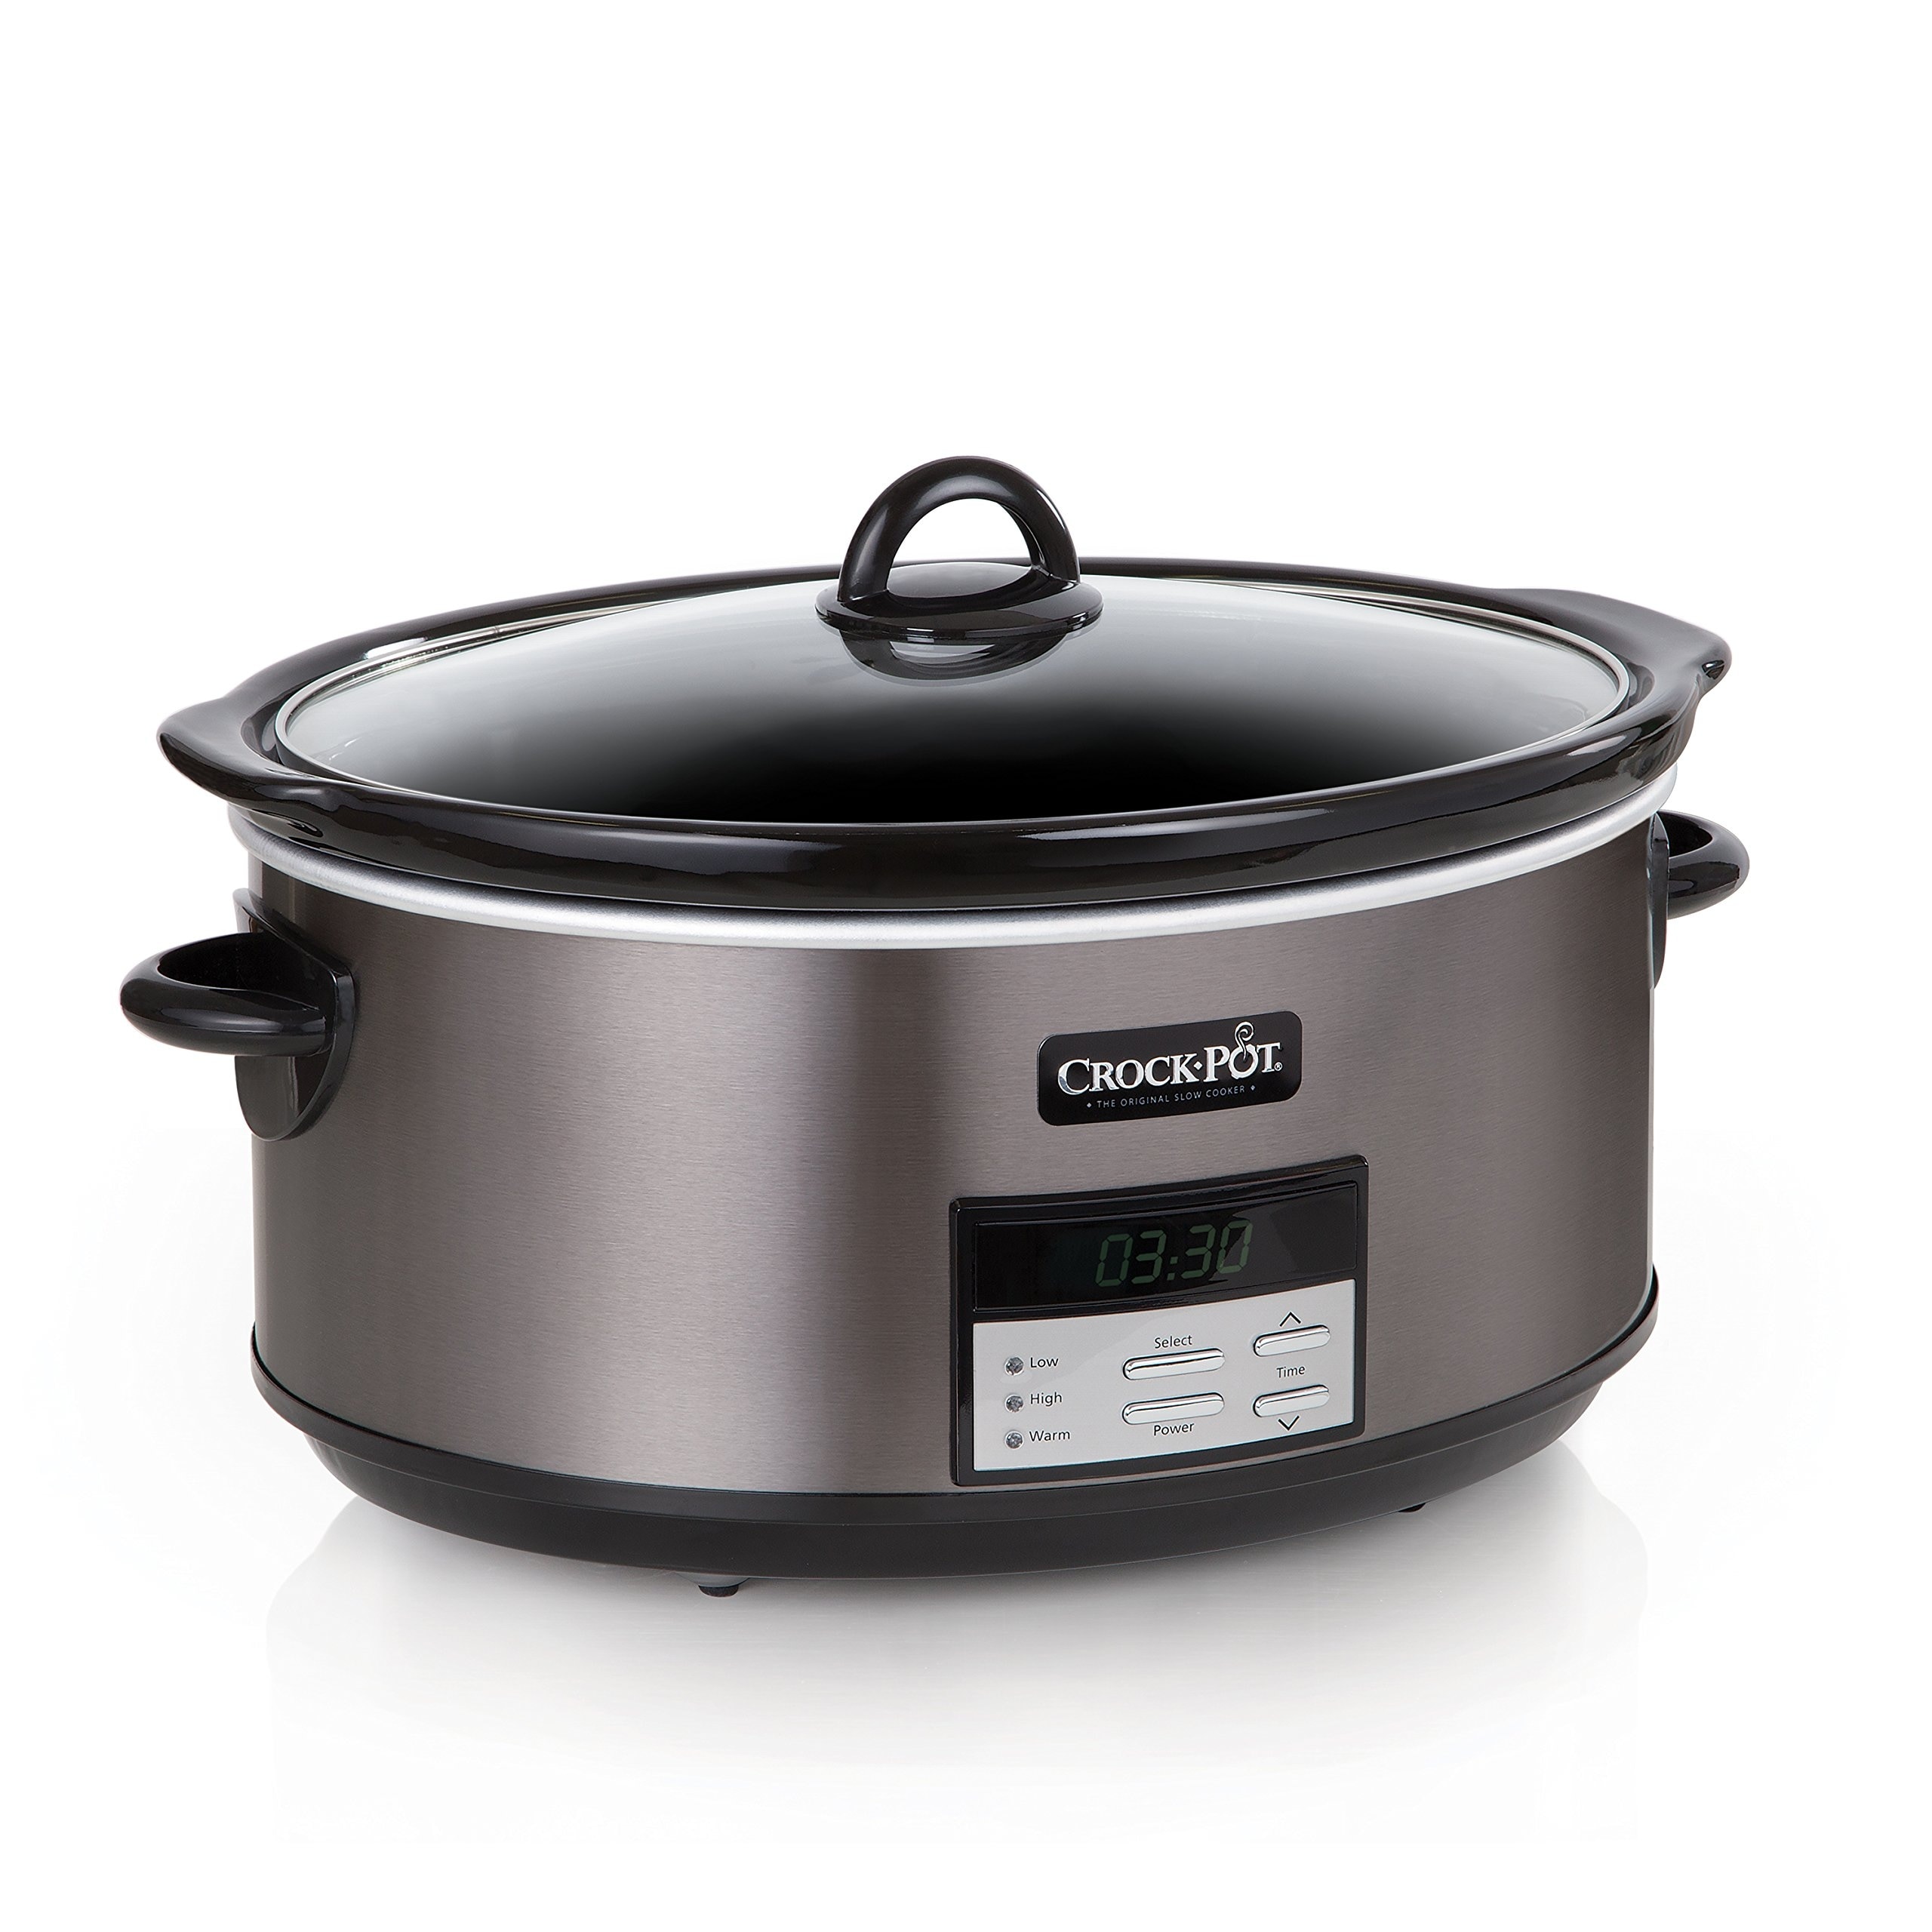 https://ak1.ostkcdn.com/images/products/is/images/direct/1846b10f0e1378ac2f5a5a6e1419e6b8077f4a8d/Large-8-Quart-Programmable-Slow-Cooker-with-Auto-Warm-Setting-and-Cookbook%2C-Black-Stainless-Steel.jpg